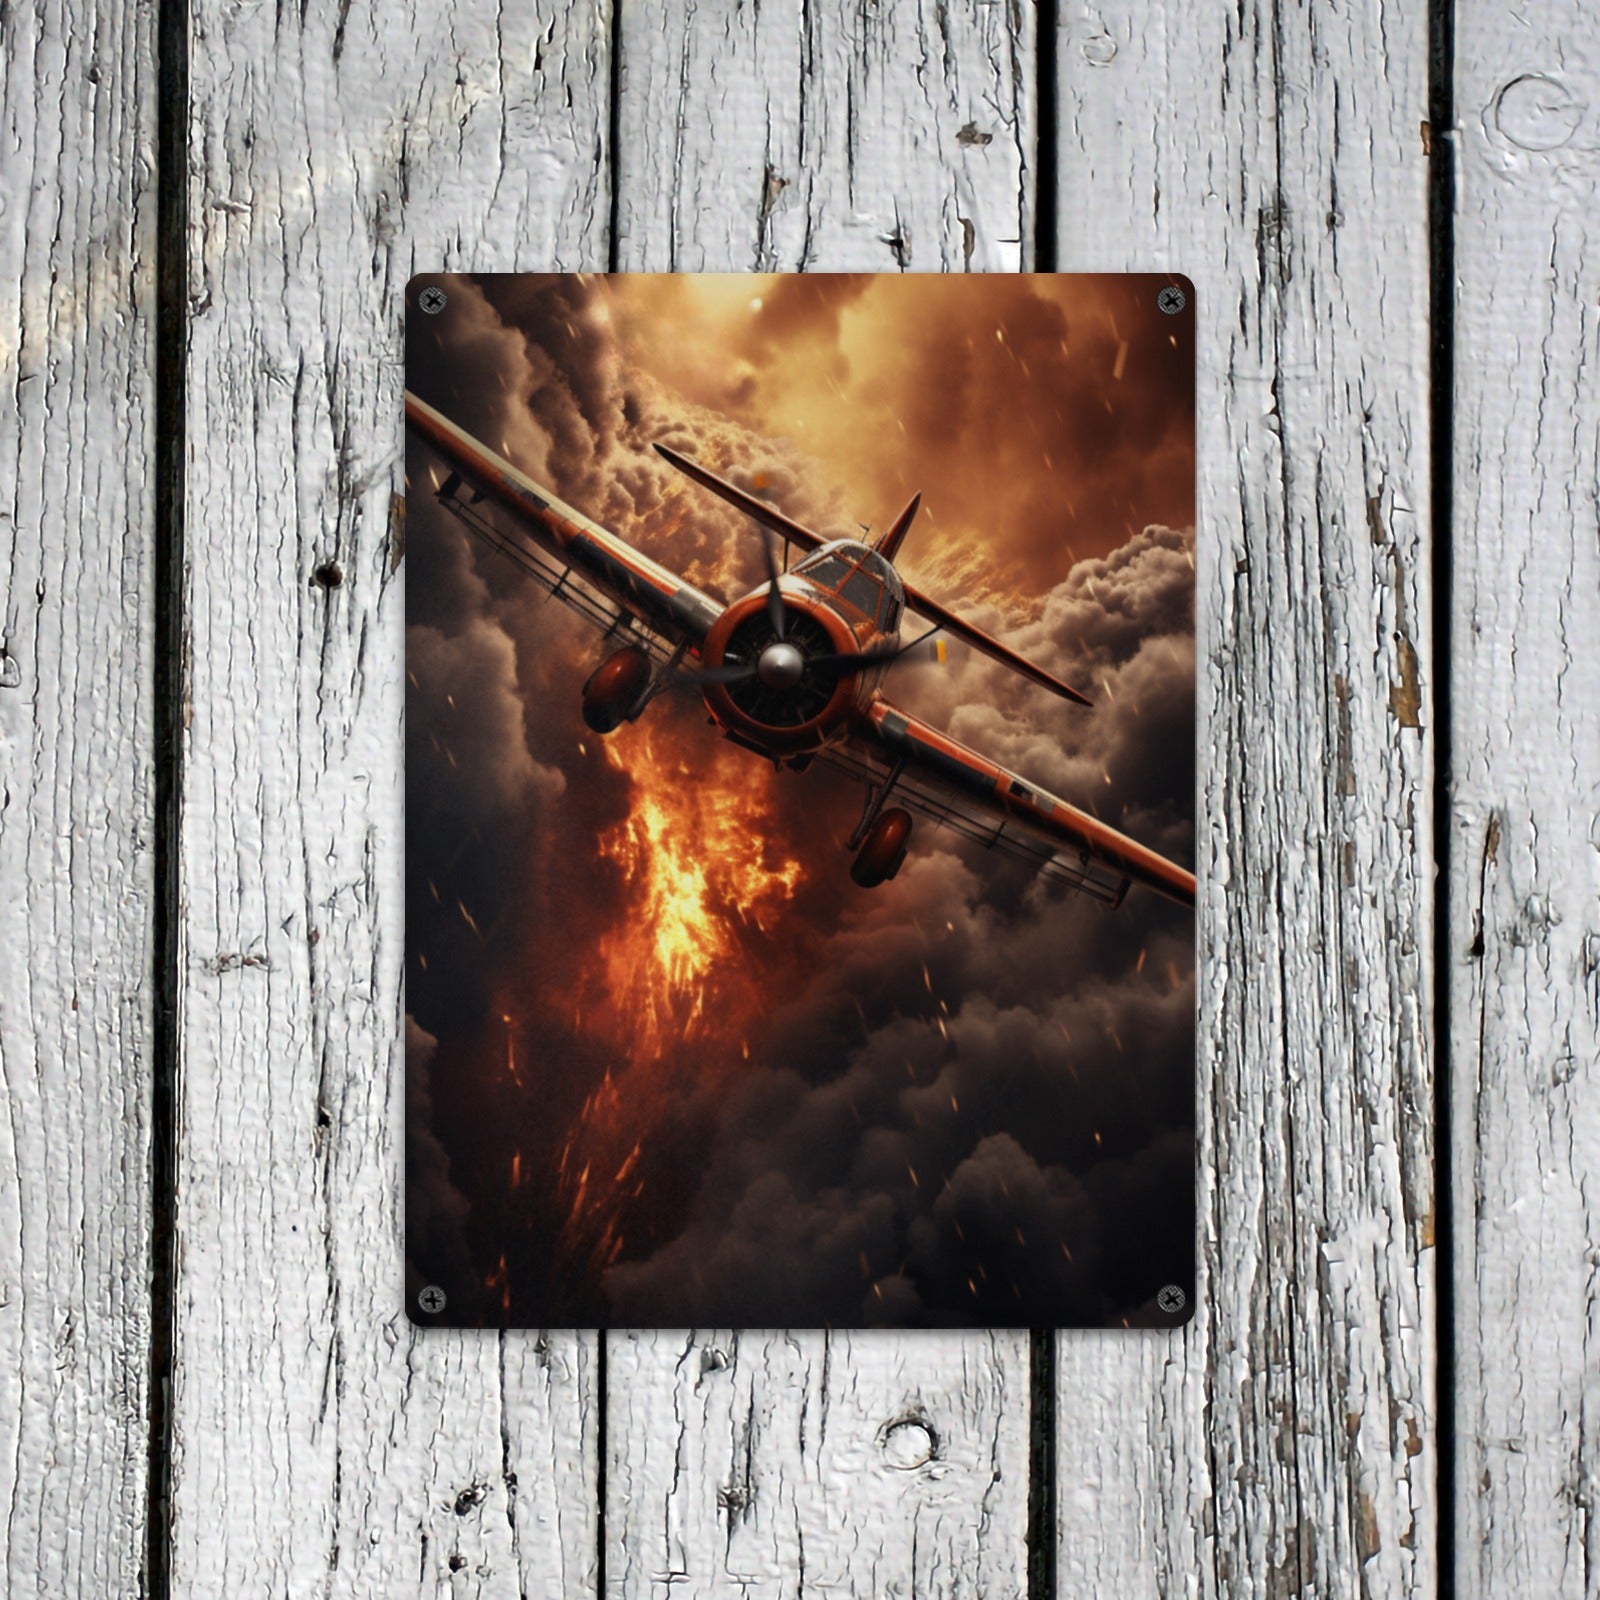 Kids Game Room Home Decor Wall Art Poster Military Airplane Sign Indoor / Outdoor Metal Tin Sign 12"x16"